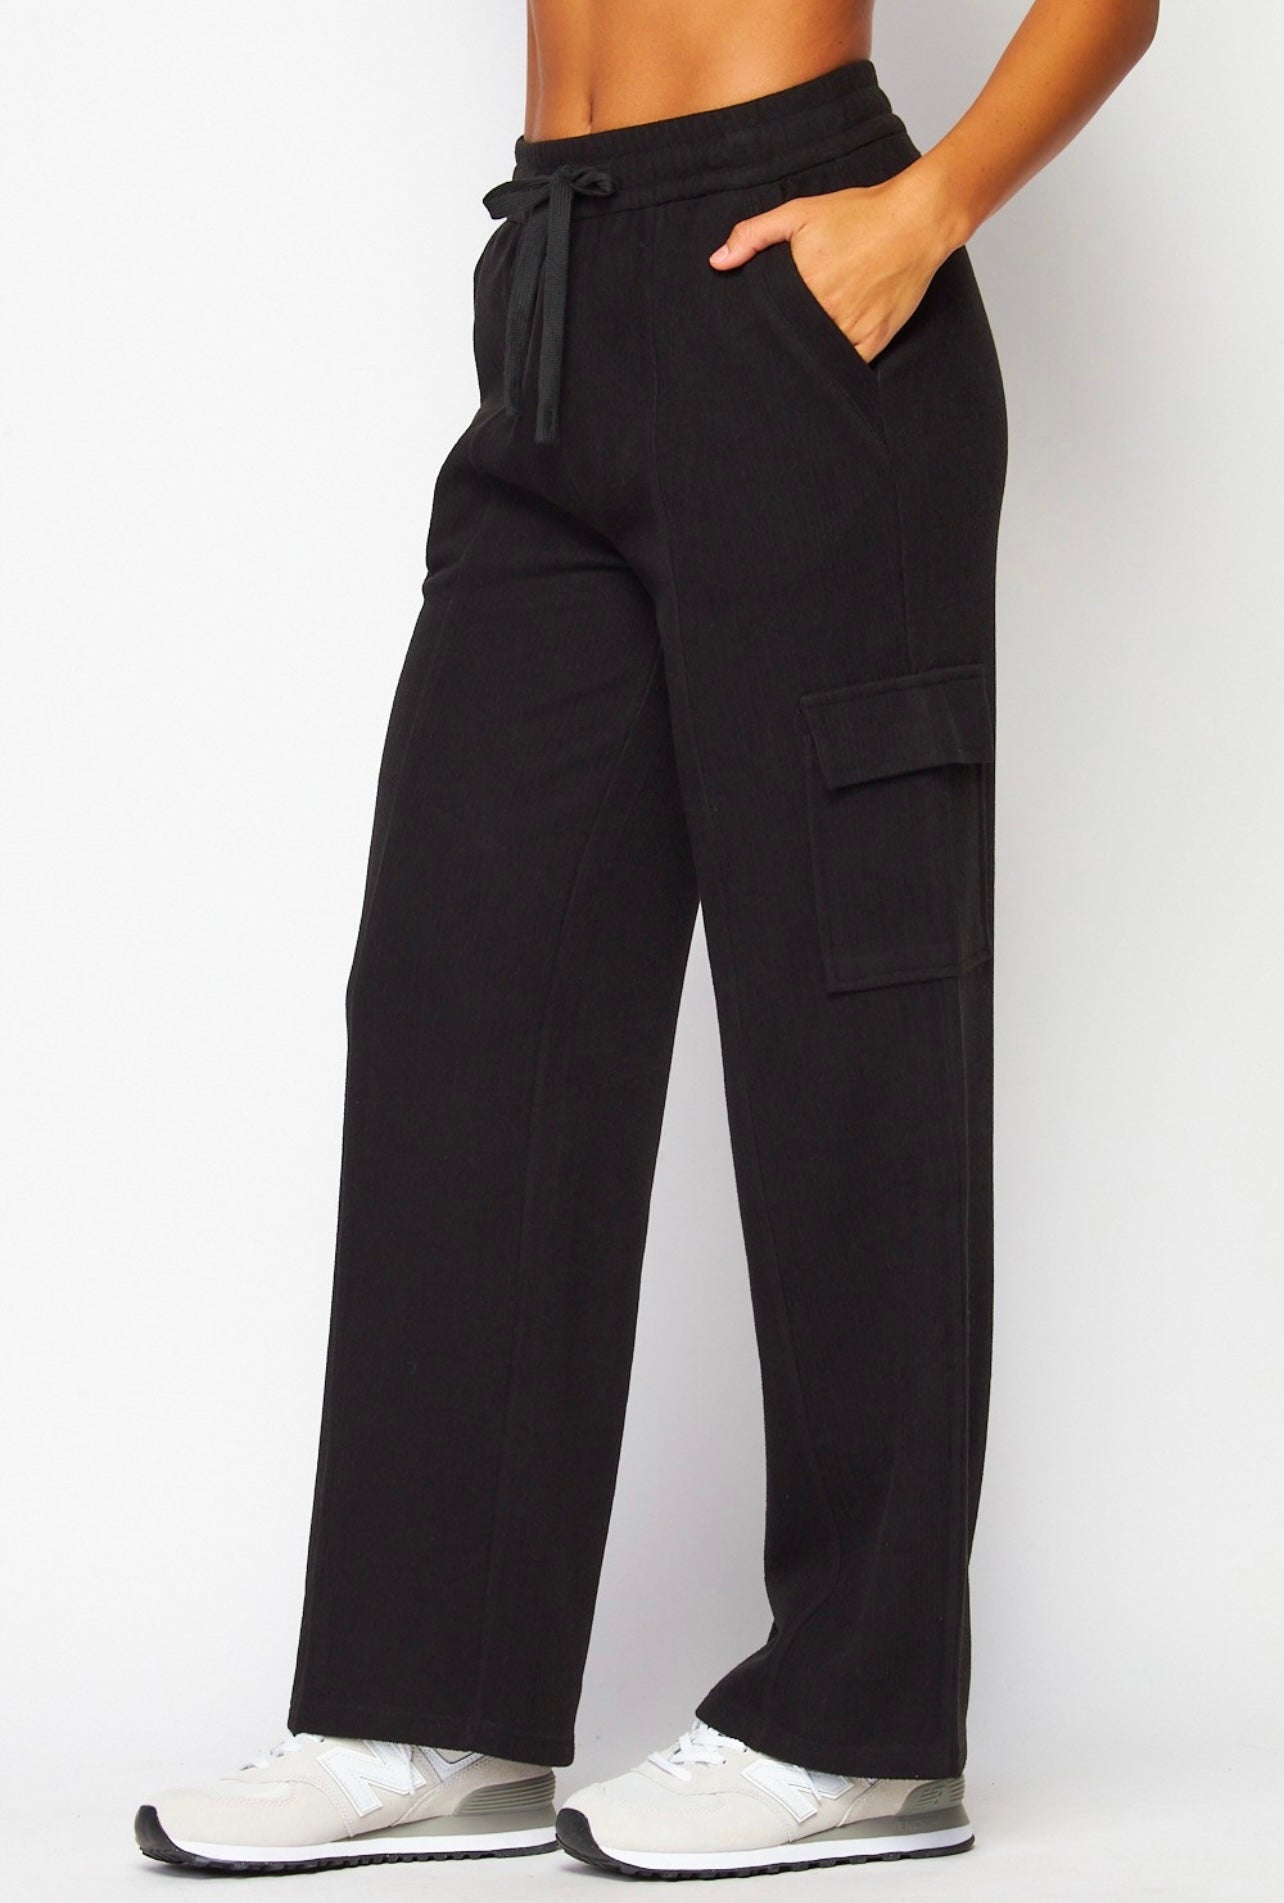 The Lucy Mae Cargo Sweatpants- Black